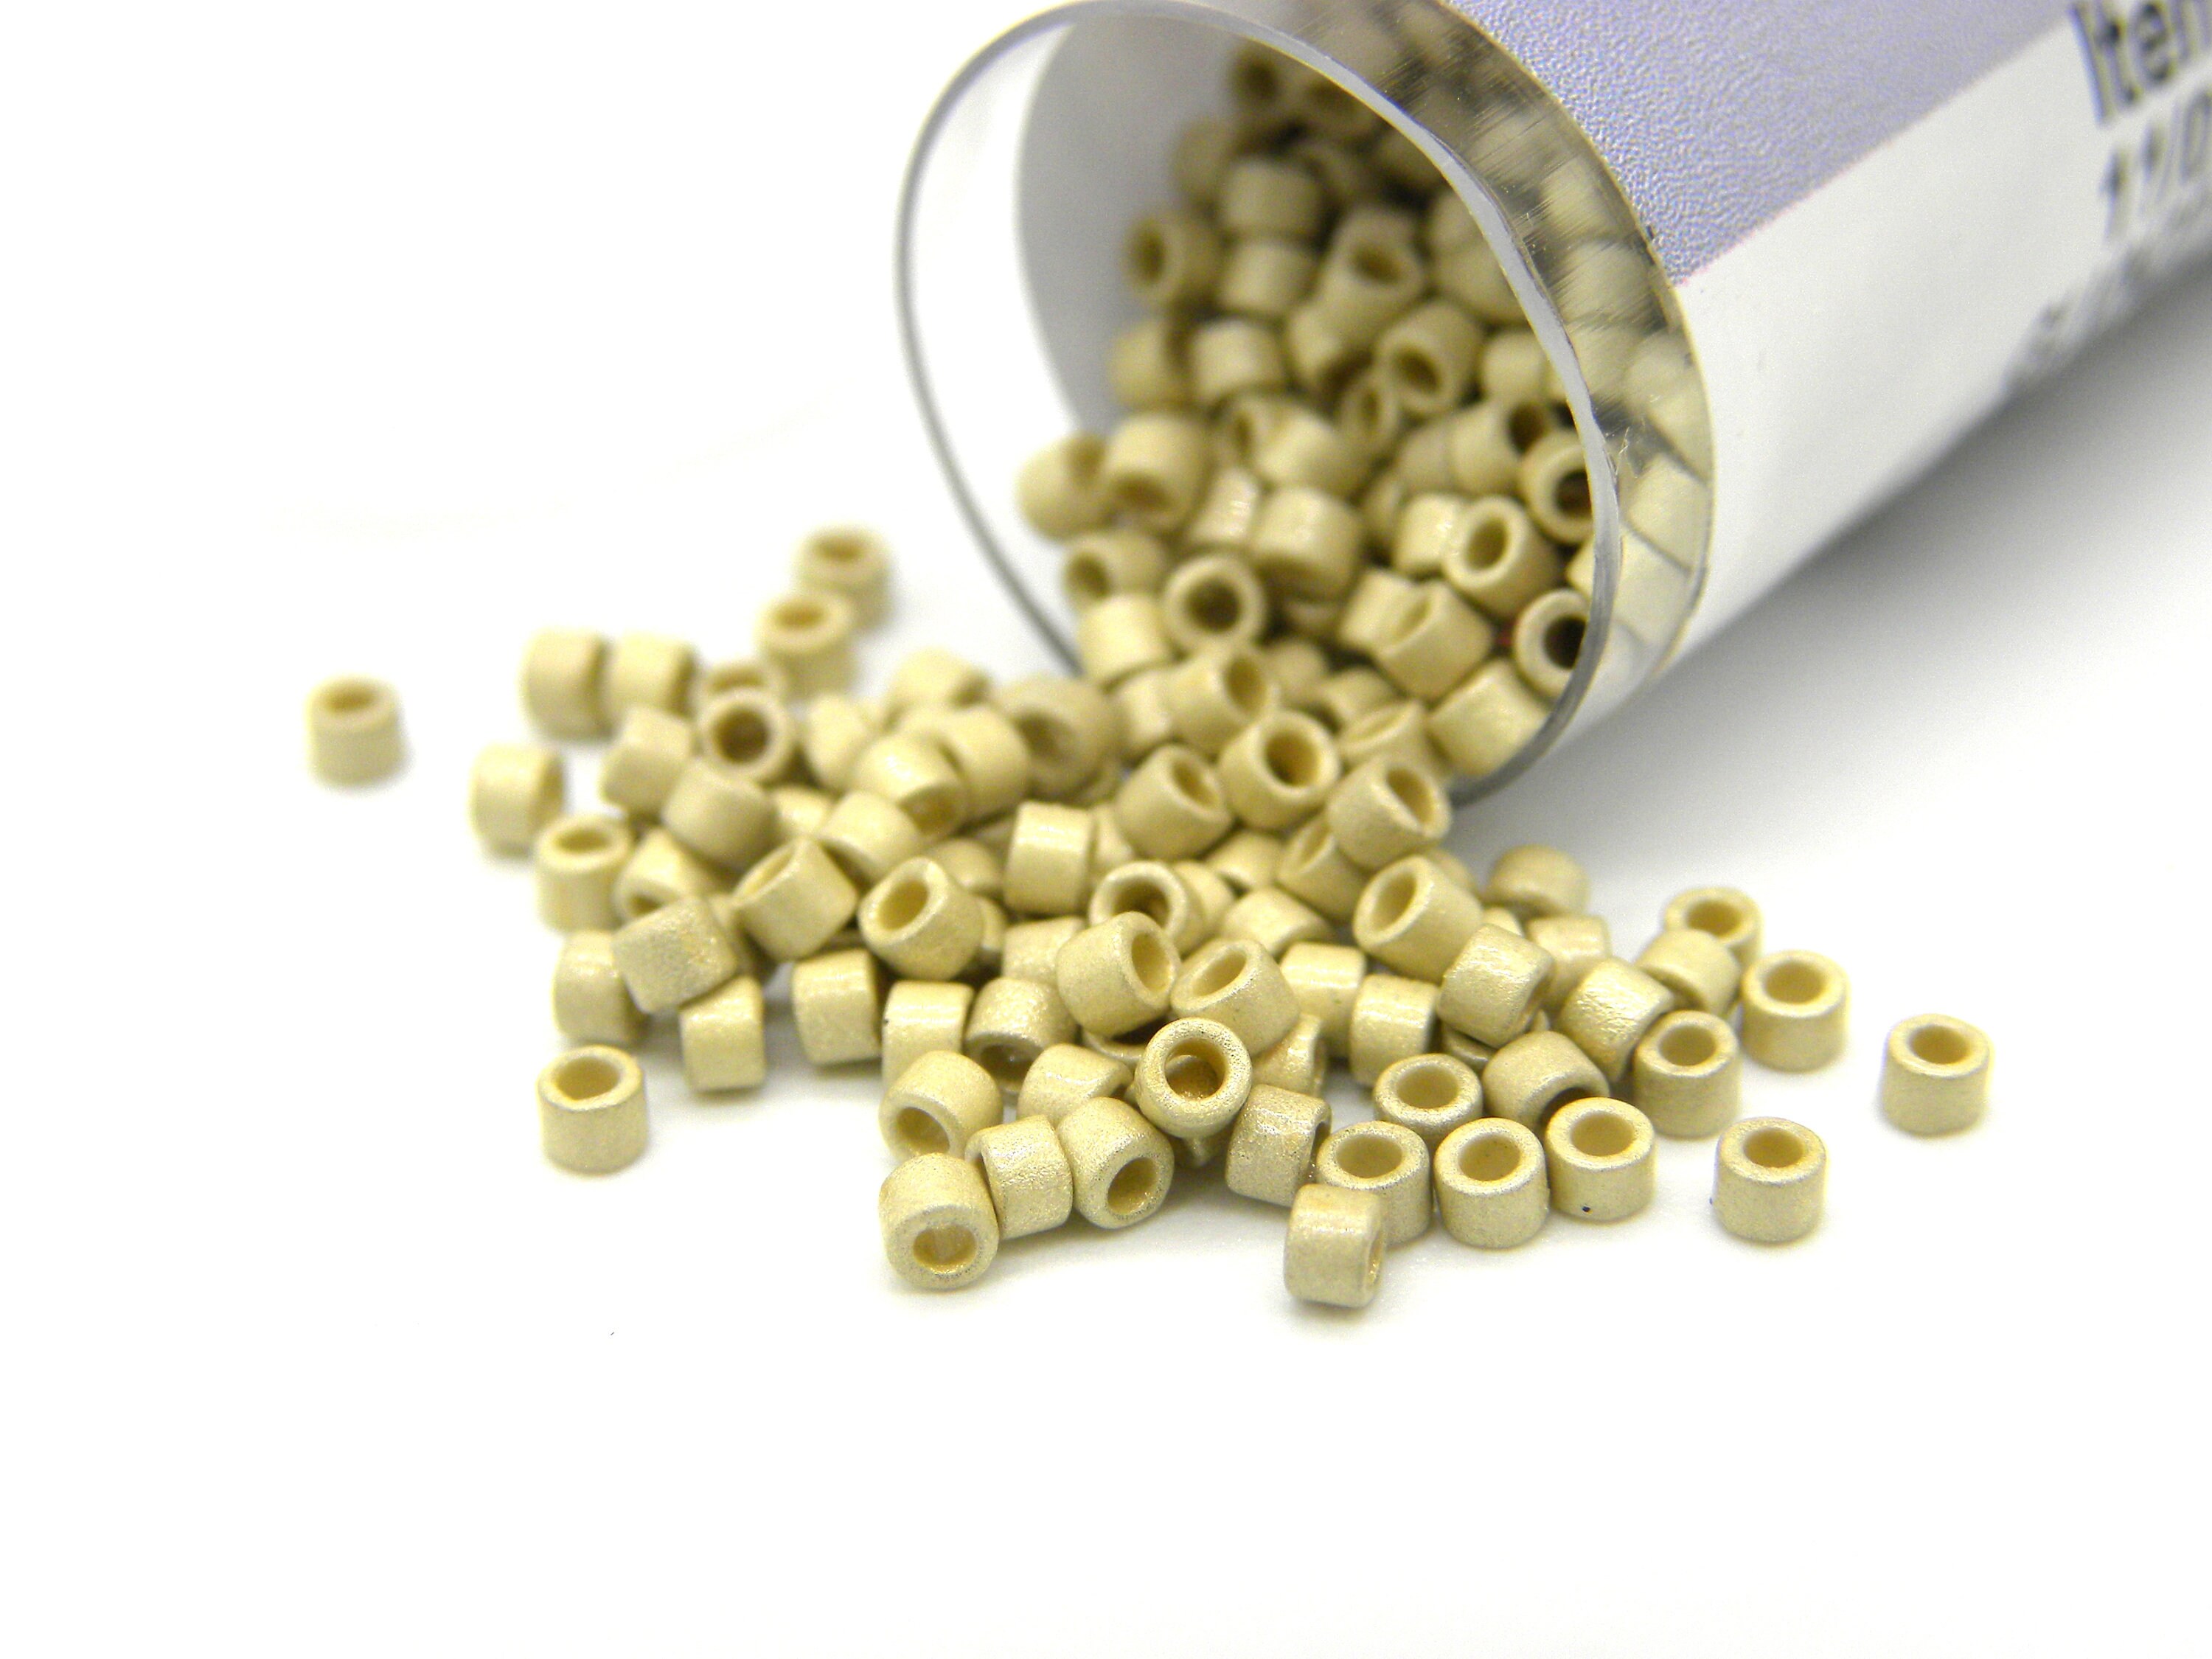 2 Mm Medium-size Crimp Beads 316 Surgical Stainless Steel Plat. Silver or  Gold 1 G .03 Oz Approx. 100 Beads 